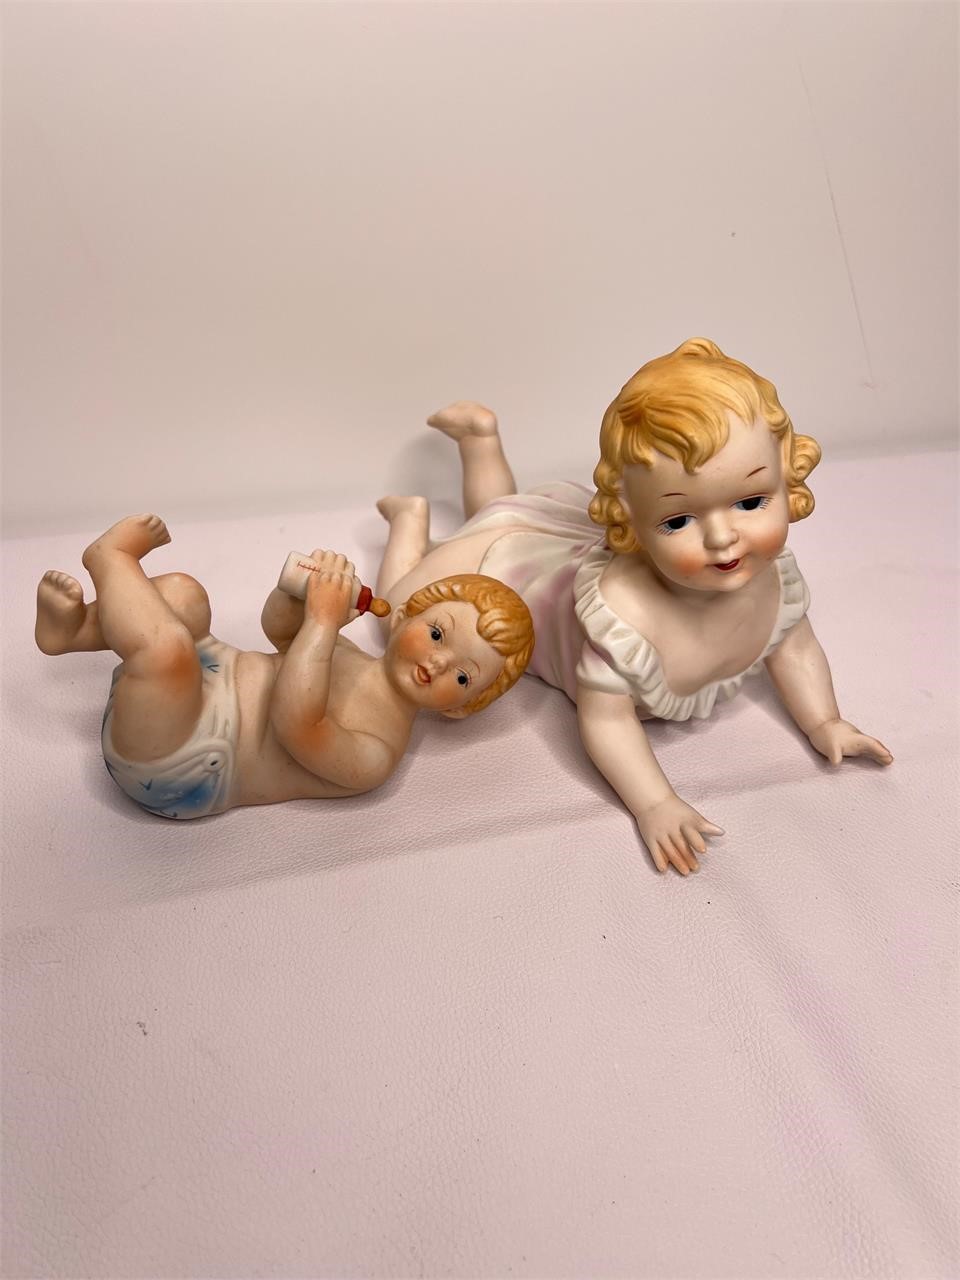 Lot of 2 VTG Cute Crawling Baby Figurines